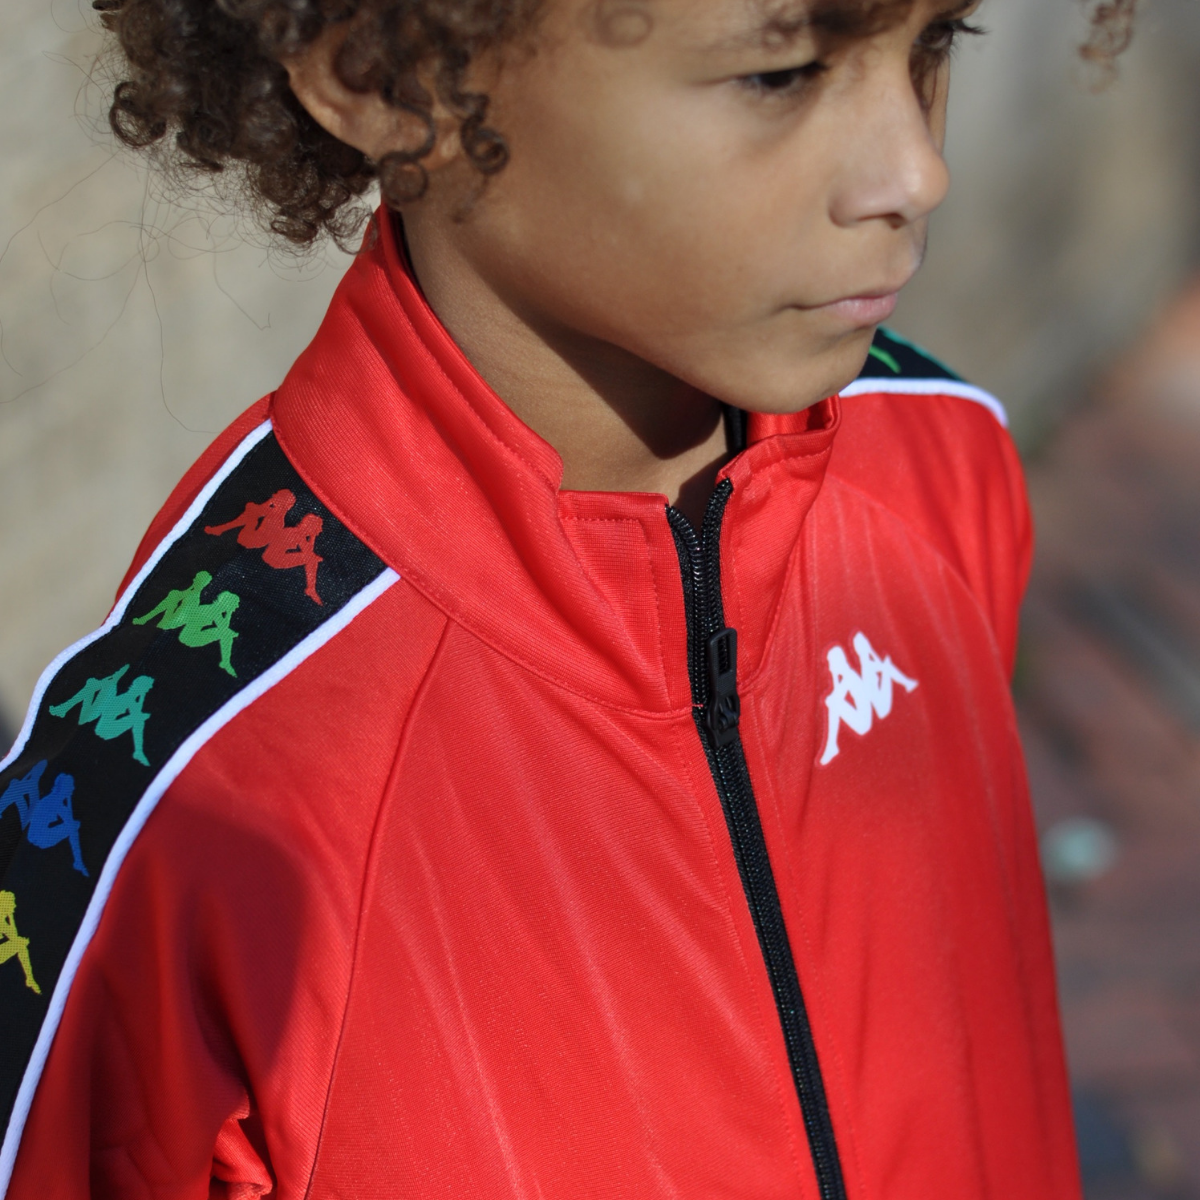 New In The Shop - Iconic Sportswear Brand Kappa - Little Nomad